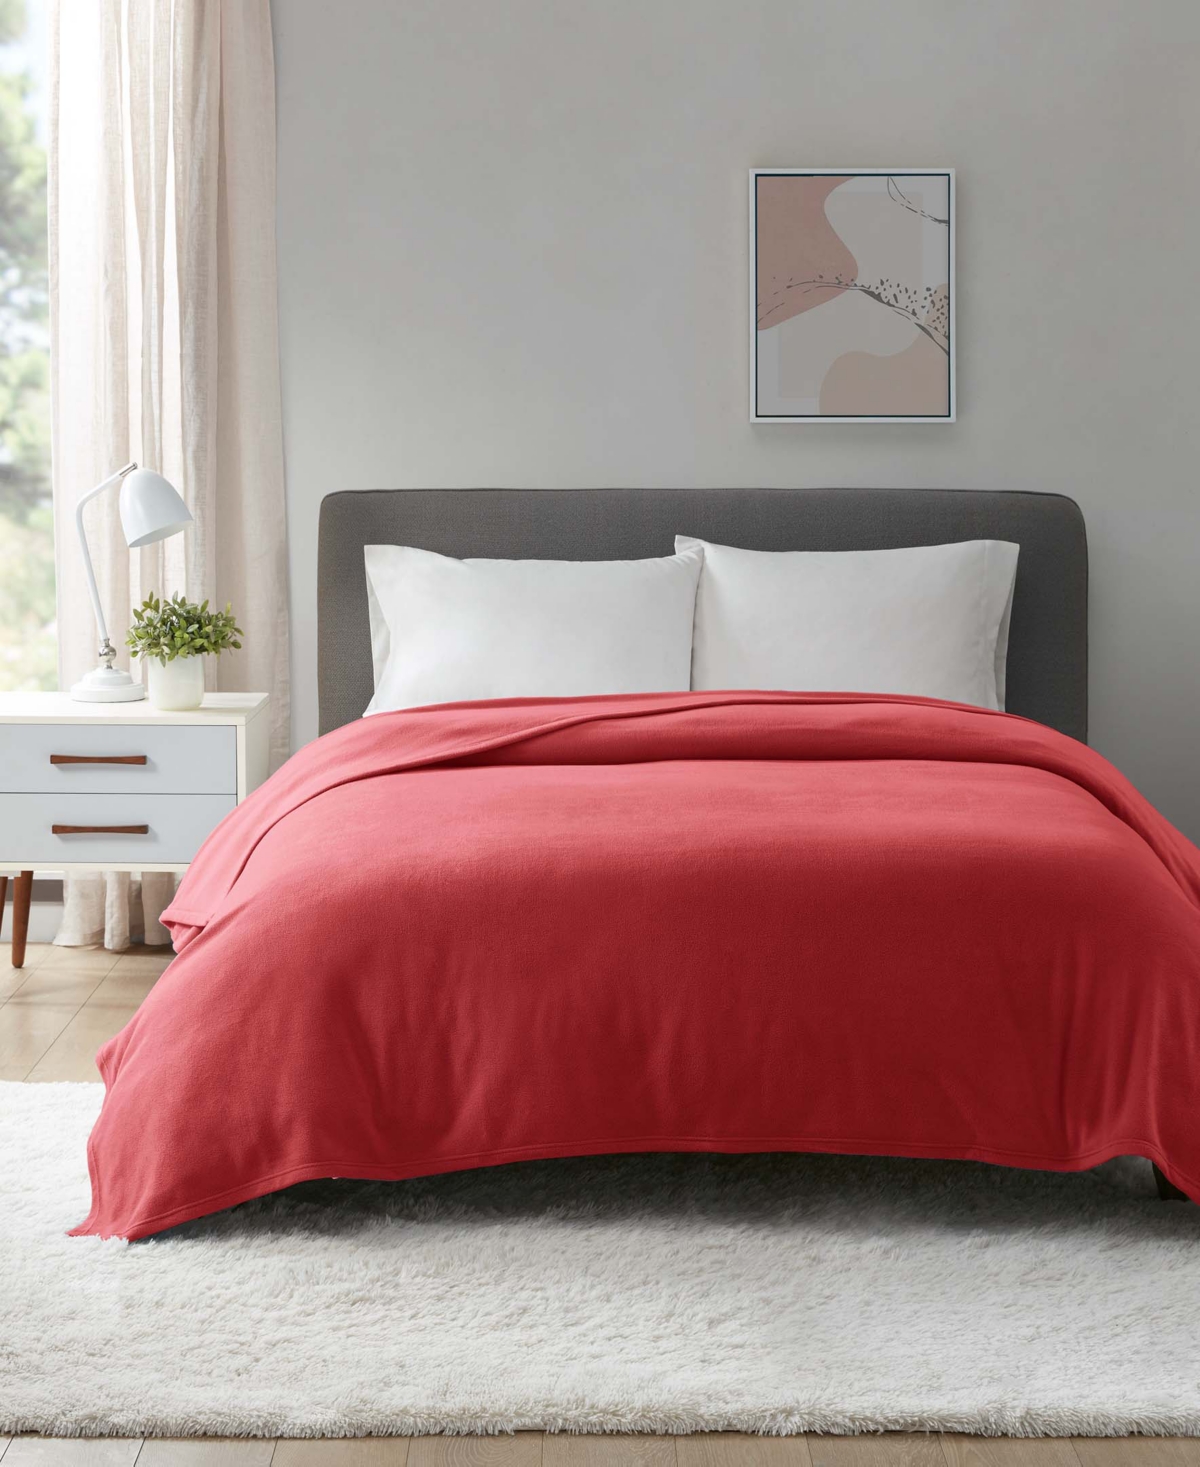 Home Design Easy Care Year-round Soft Fleece Blanket, Full/queen, Created For Macy's (a $40.00 Value) In Red